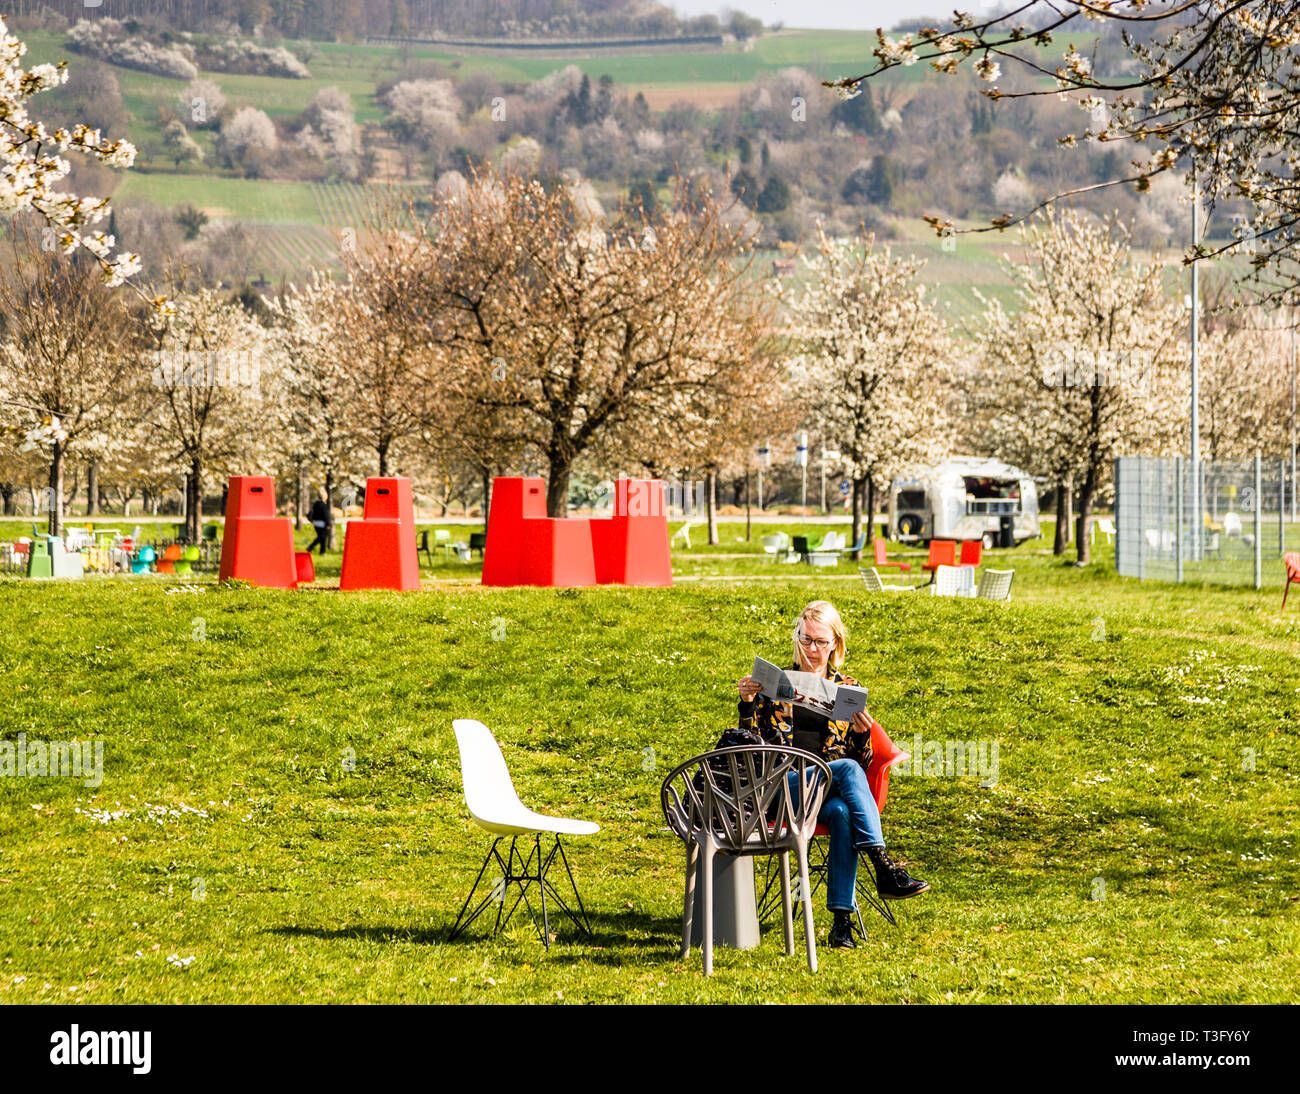 Welcome to the city of chairs. On the lawn in front of the Vitra House, countless designer chairs stand in the landscape. As a visitor, you move your Panton, Eames or a Vegetal by Bouroullec to your liking. In the background, a group of red Stool Tools by Konstantin Grcic. Even further behind the vineyards of Weil. Vitra Campus in Weil am Rhein, Germany Stock Photo